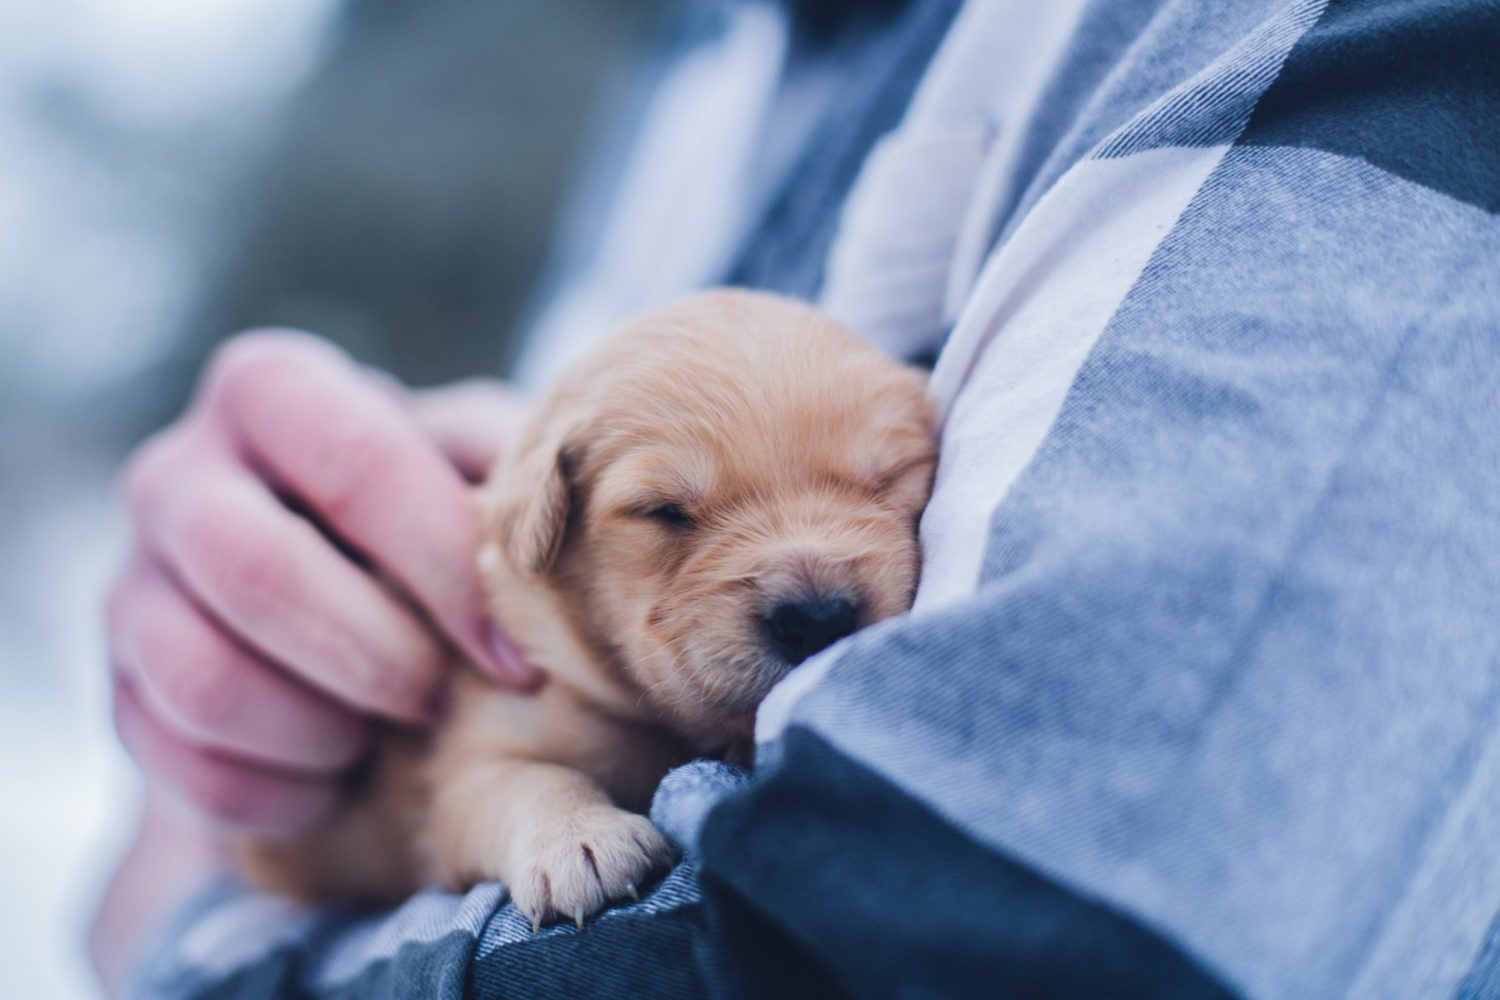 Washingtonian's Cutest Dog Contest: Just taking a little snooze. Photograph by Lydia Torrey via Unsplash.